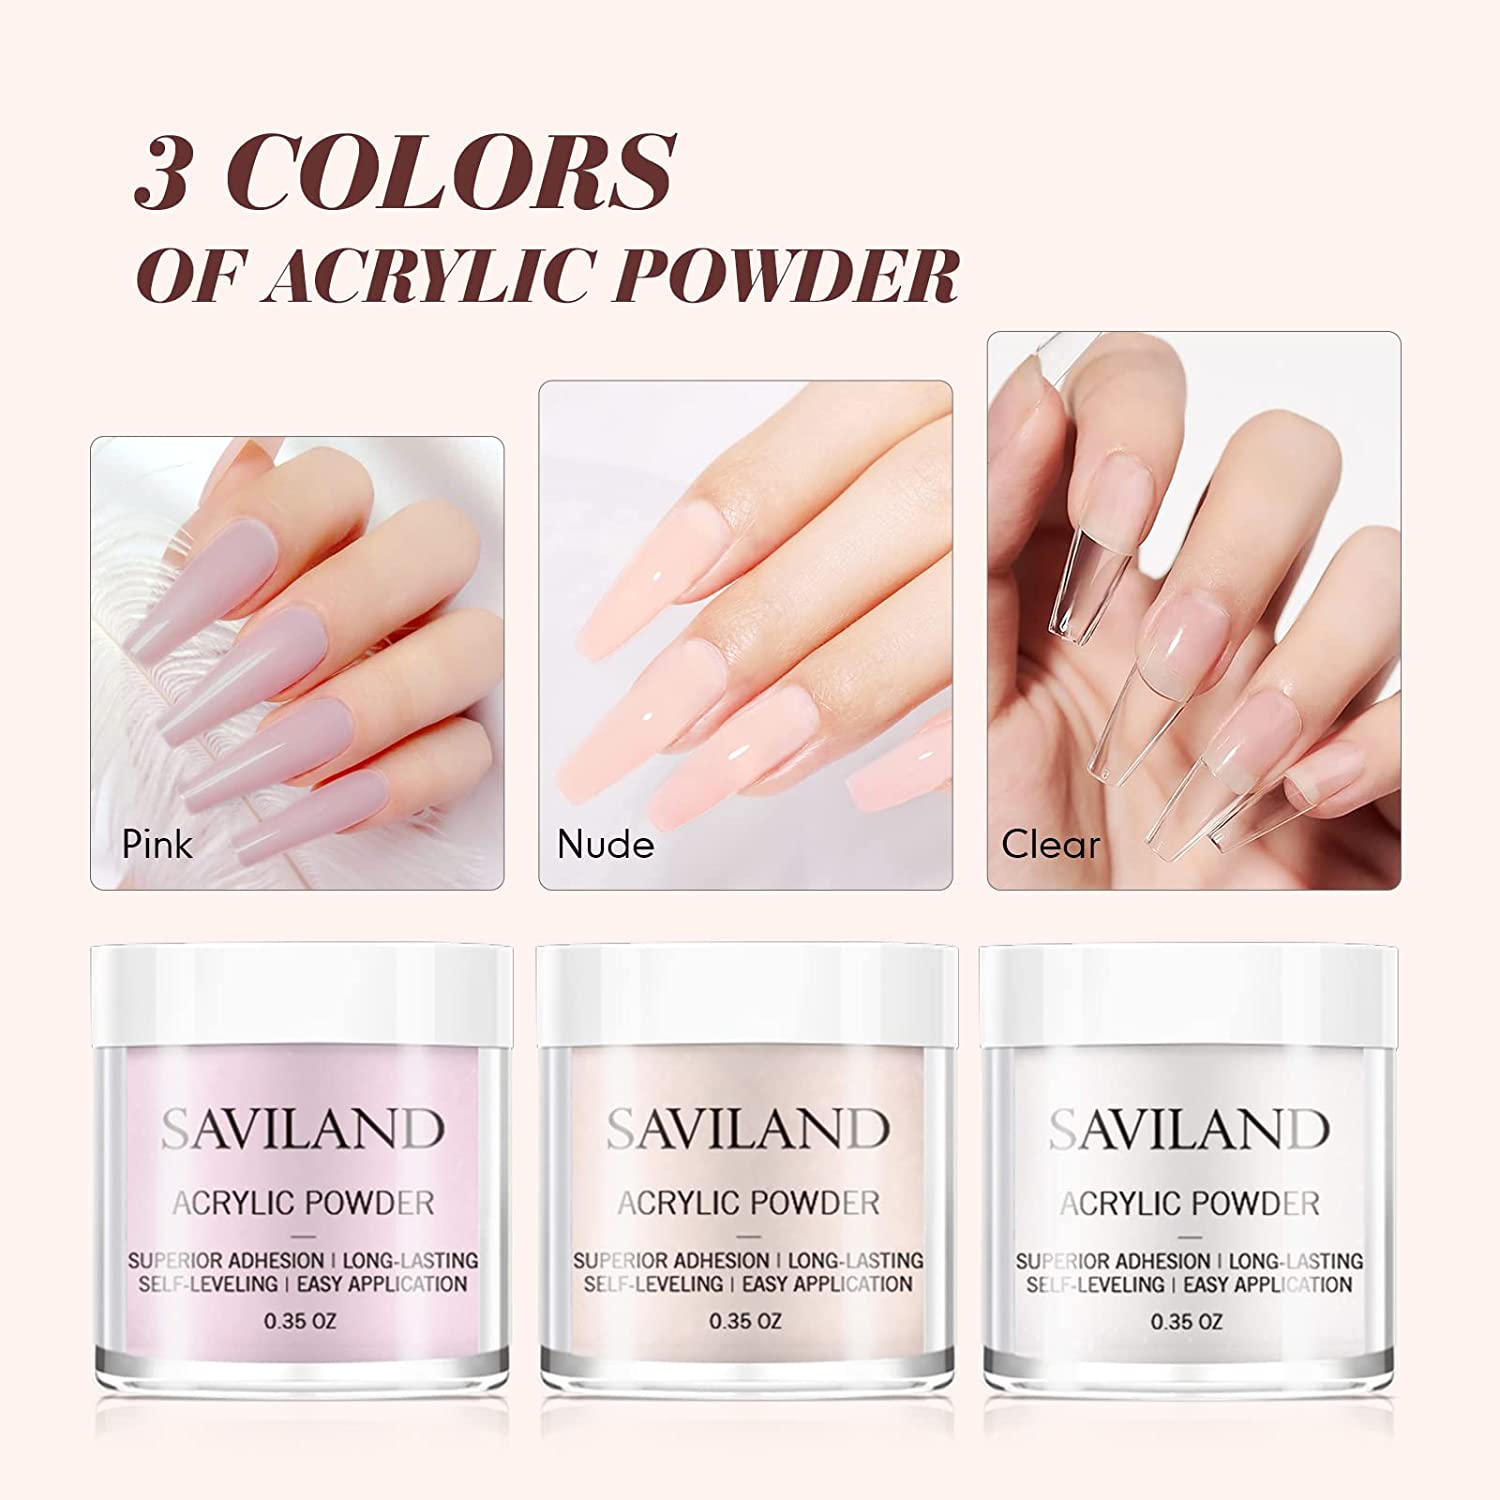 Saviland Acrylic Nail Kit - 3 Colors Clear/Pink/Nudes Acrylic Powder and Liquid Set with Monomer Acrylic Liquid, Acrylic Nail Brush and Nail Forms for Beginner - image 4 of 9